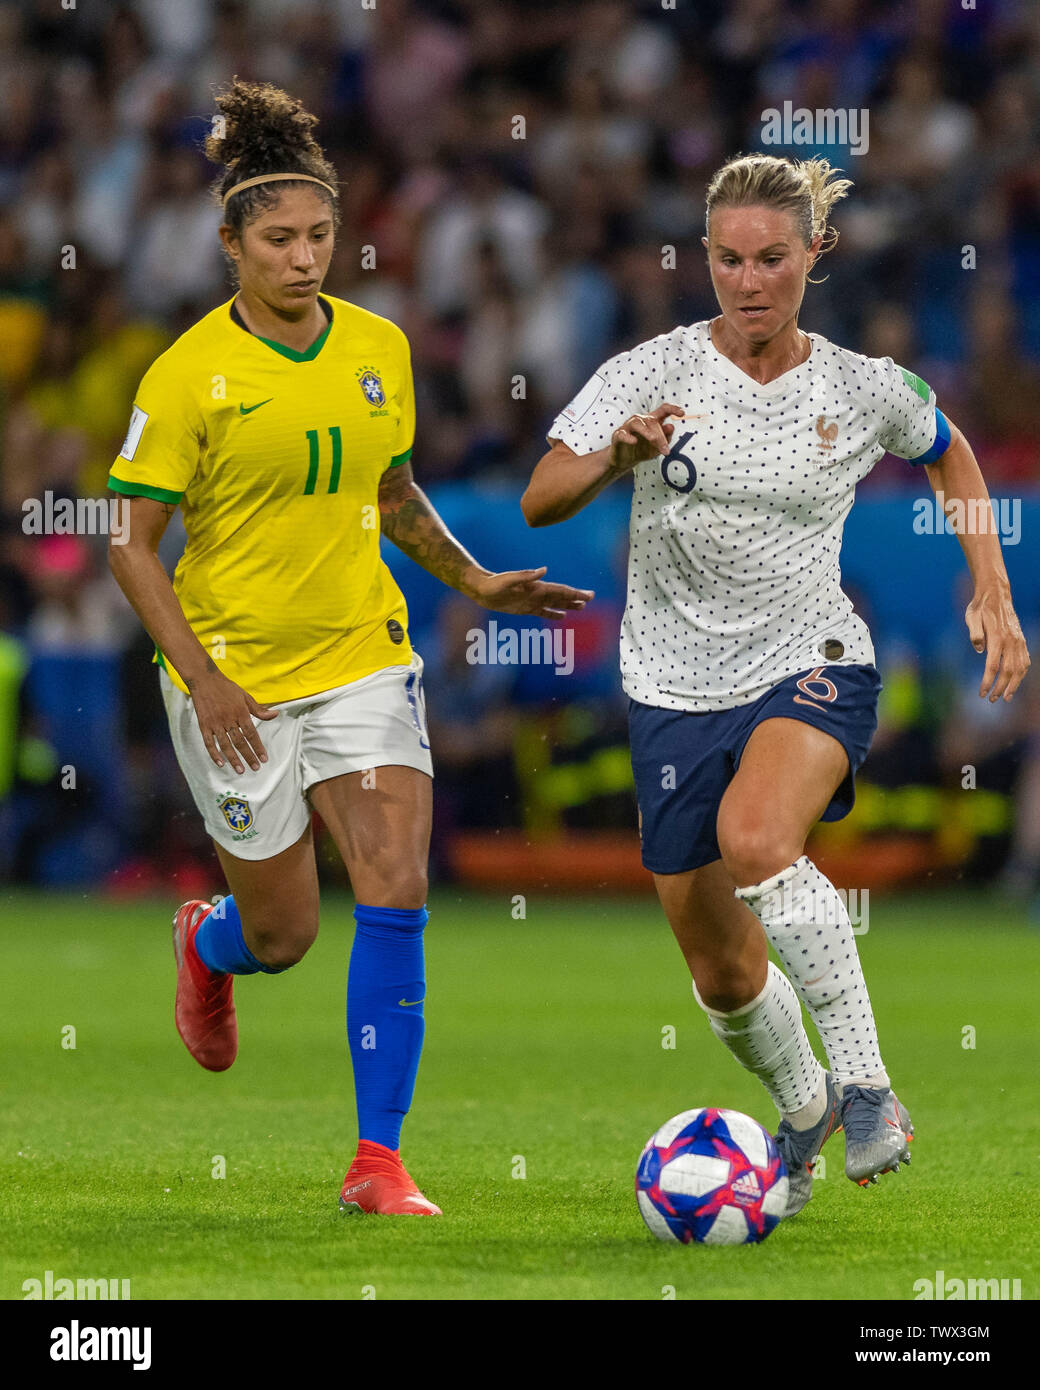 Le Havre, France. 23rd June, 2019. FRANCE V BRAZIL - Amandine Henry of France and Cristiane of Brazil during a match between Brazil and France. World Cup Qualification Football. FIFA. Held at the Oceane Stadium in Le Havre, France. (Photo: Richard Callis/Fotoarena) Credit: Foto Arena LTDA/Alamy Live News Stock Photo